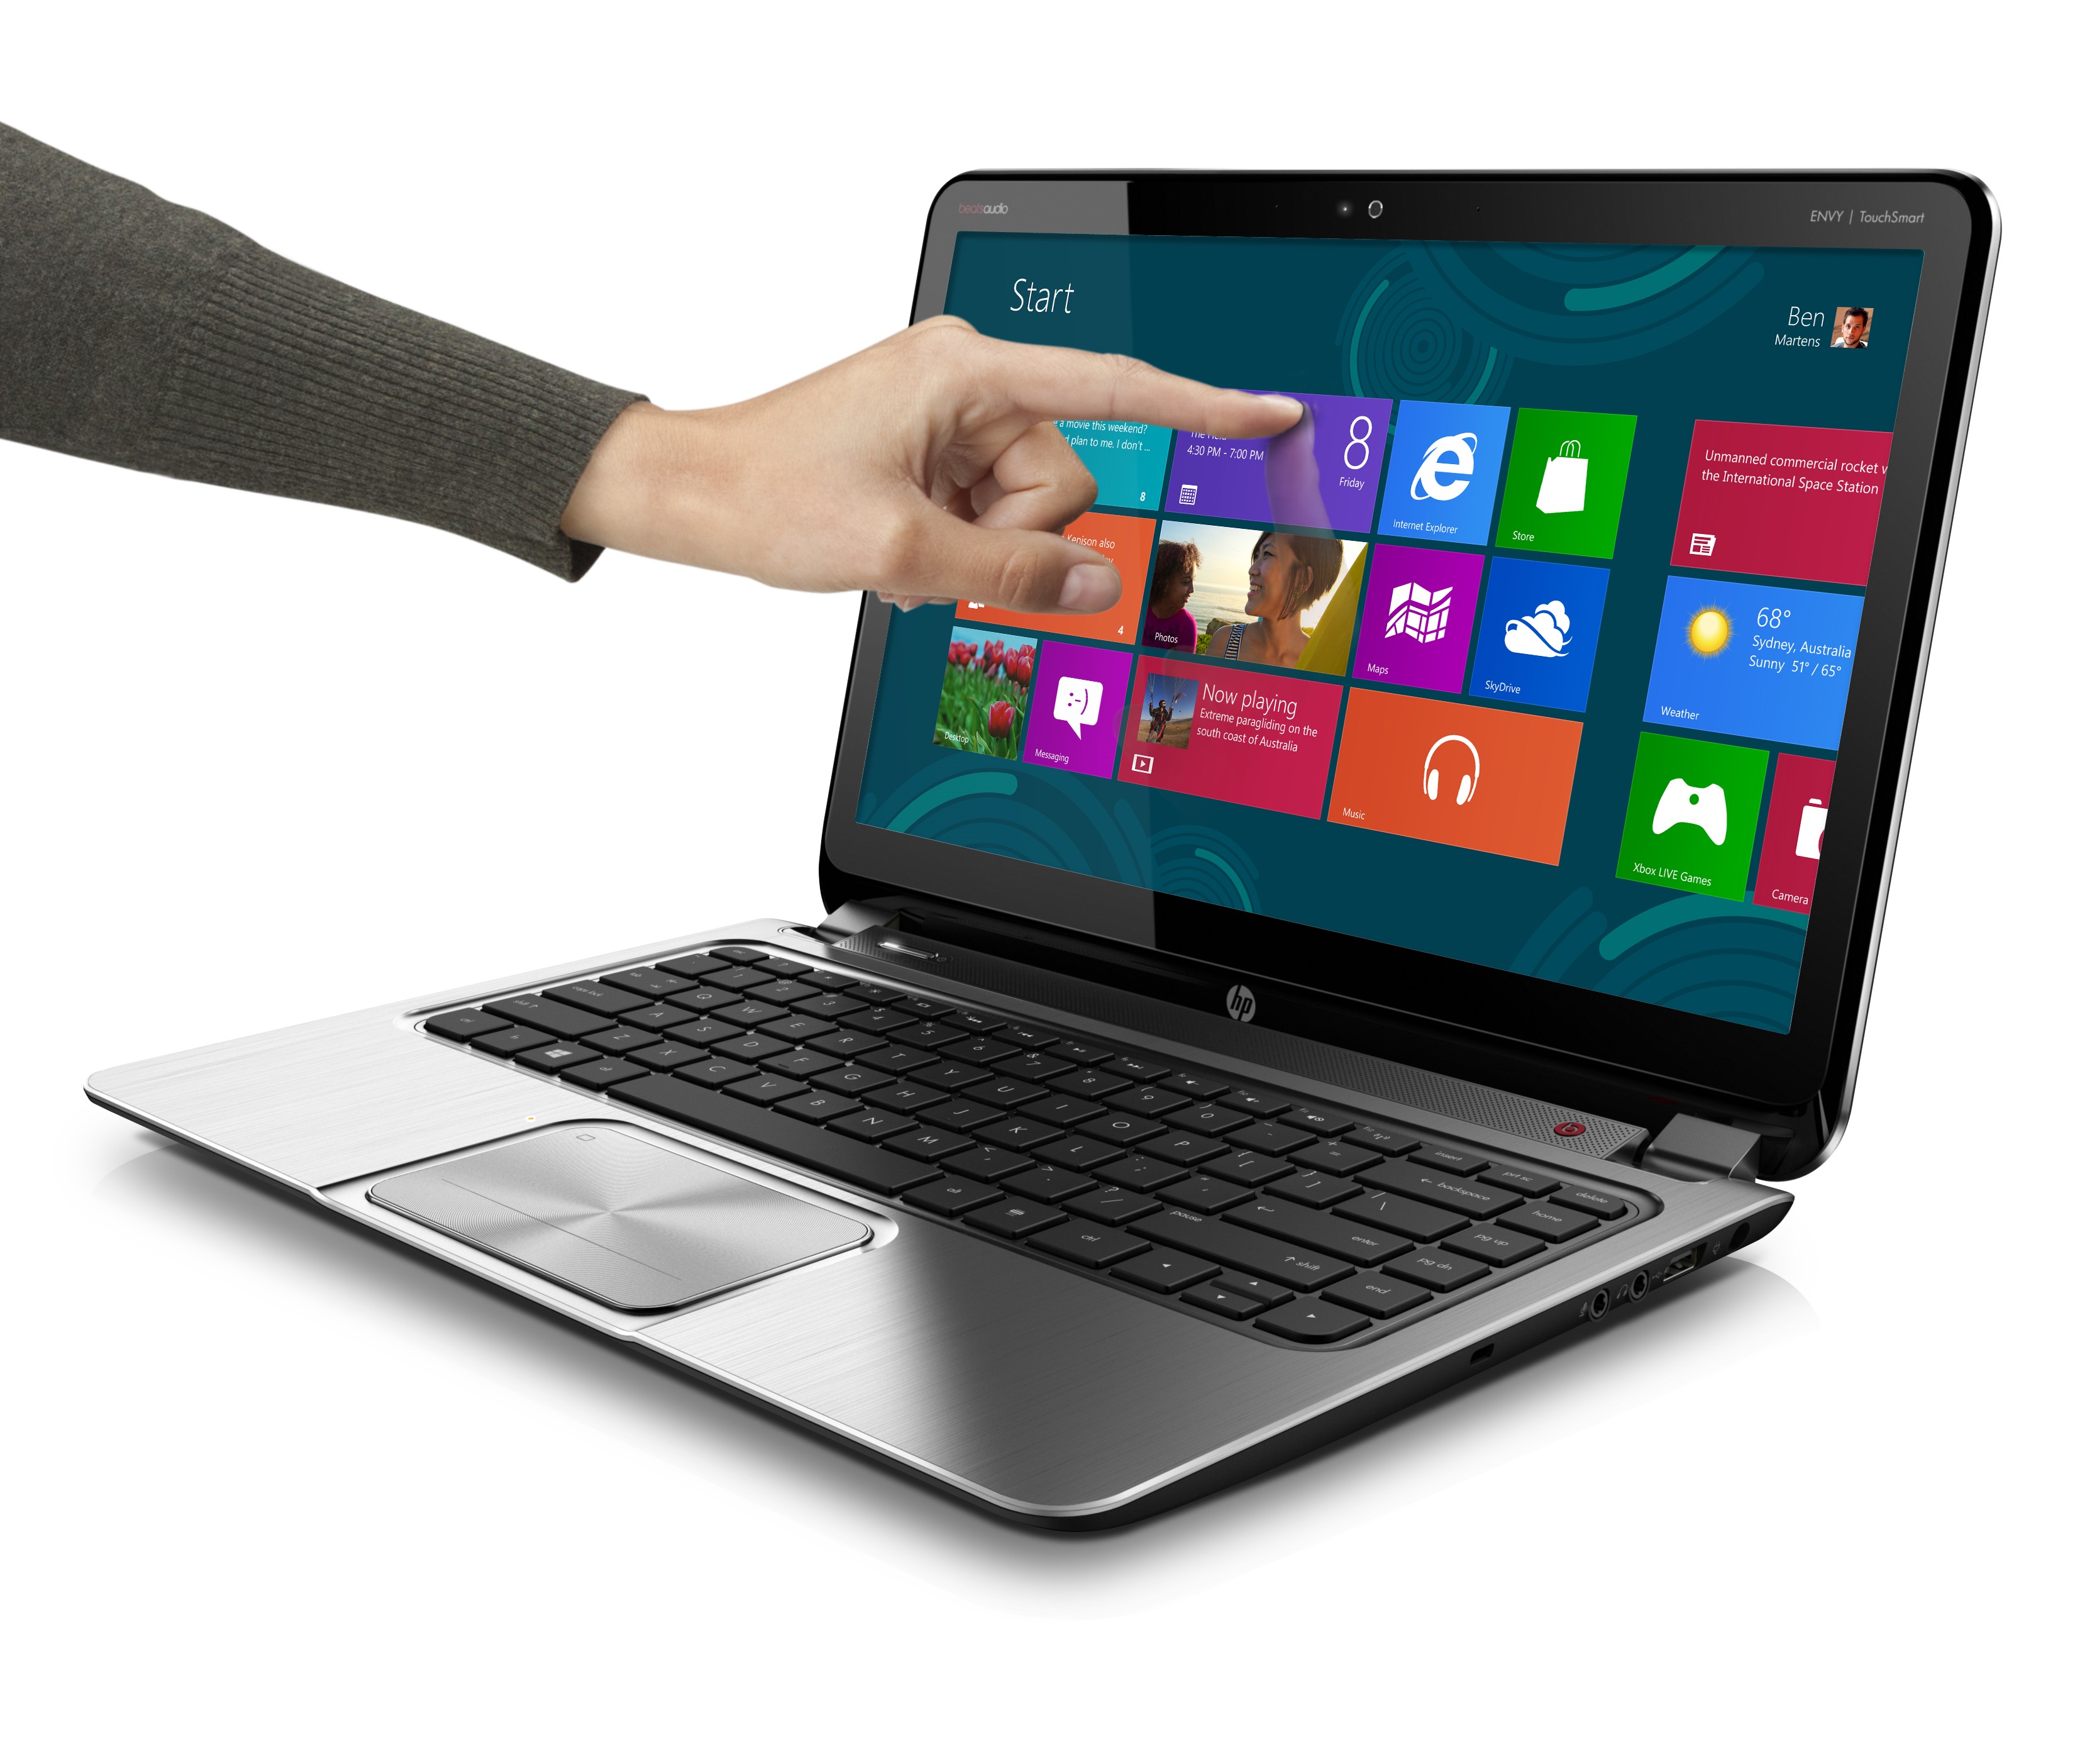 The HP ENVY TouchSmart Ultrabook 4 is a Windows OS powered laptop 